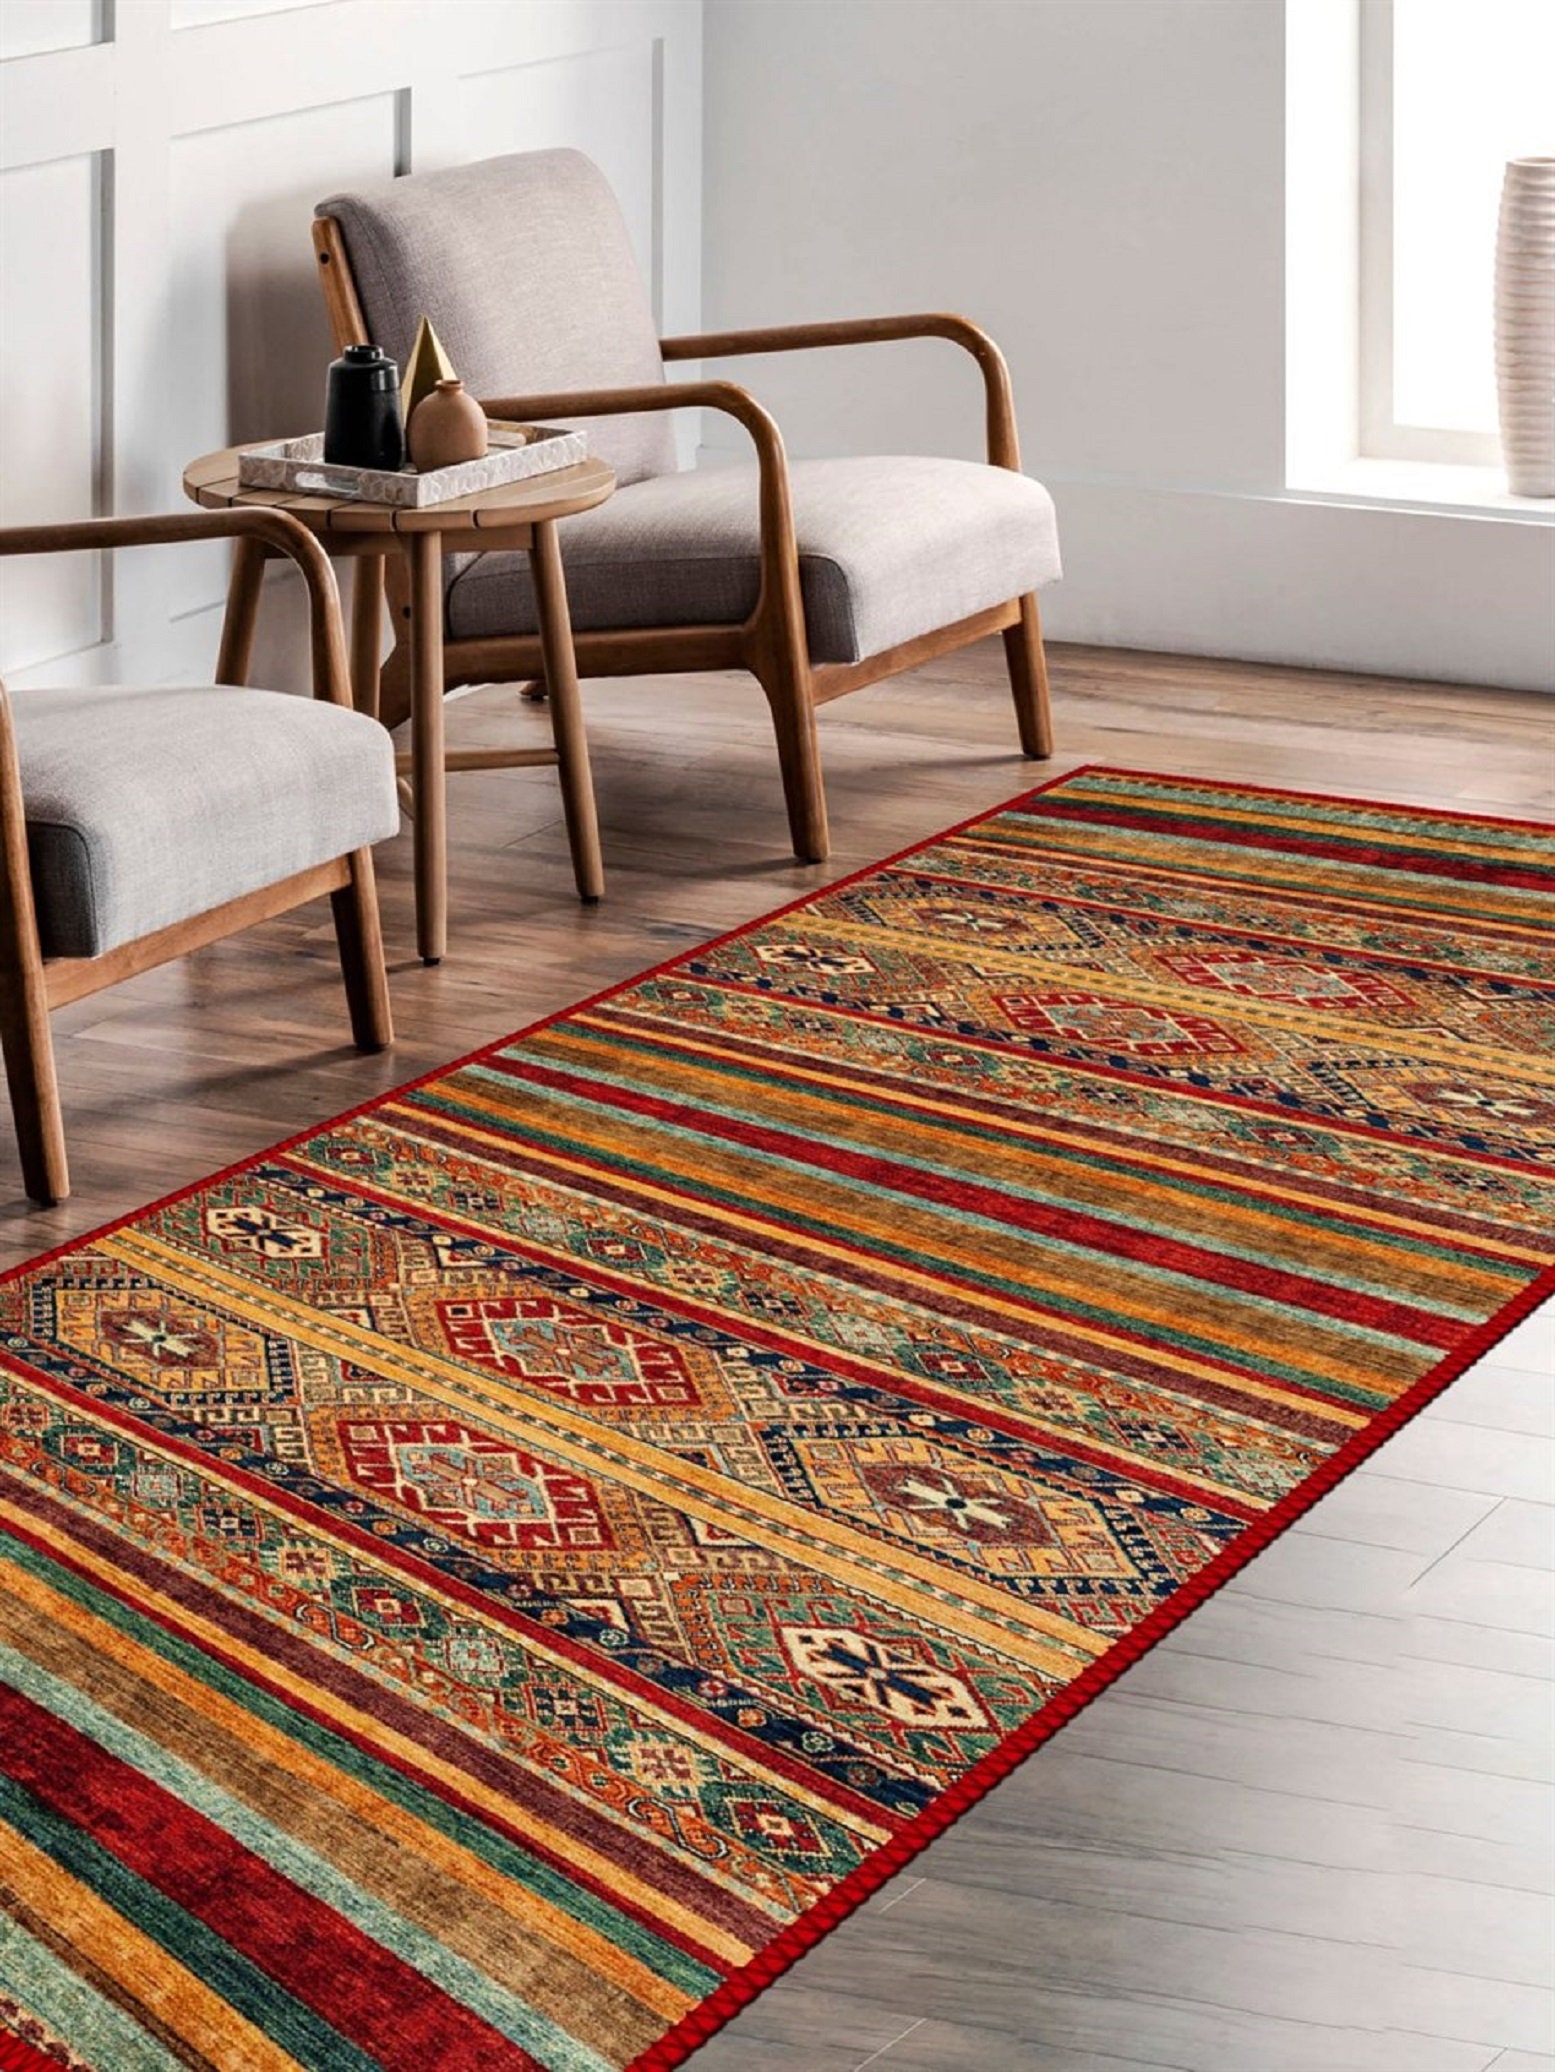 Moroccan Washable Runner Rug 2x10 Runner Rugs With Rubber Backing Ultrathin  Vint